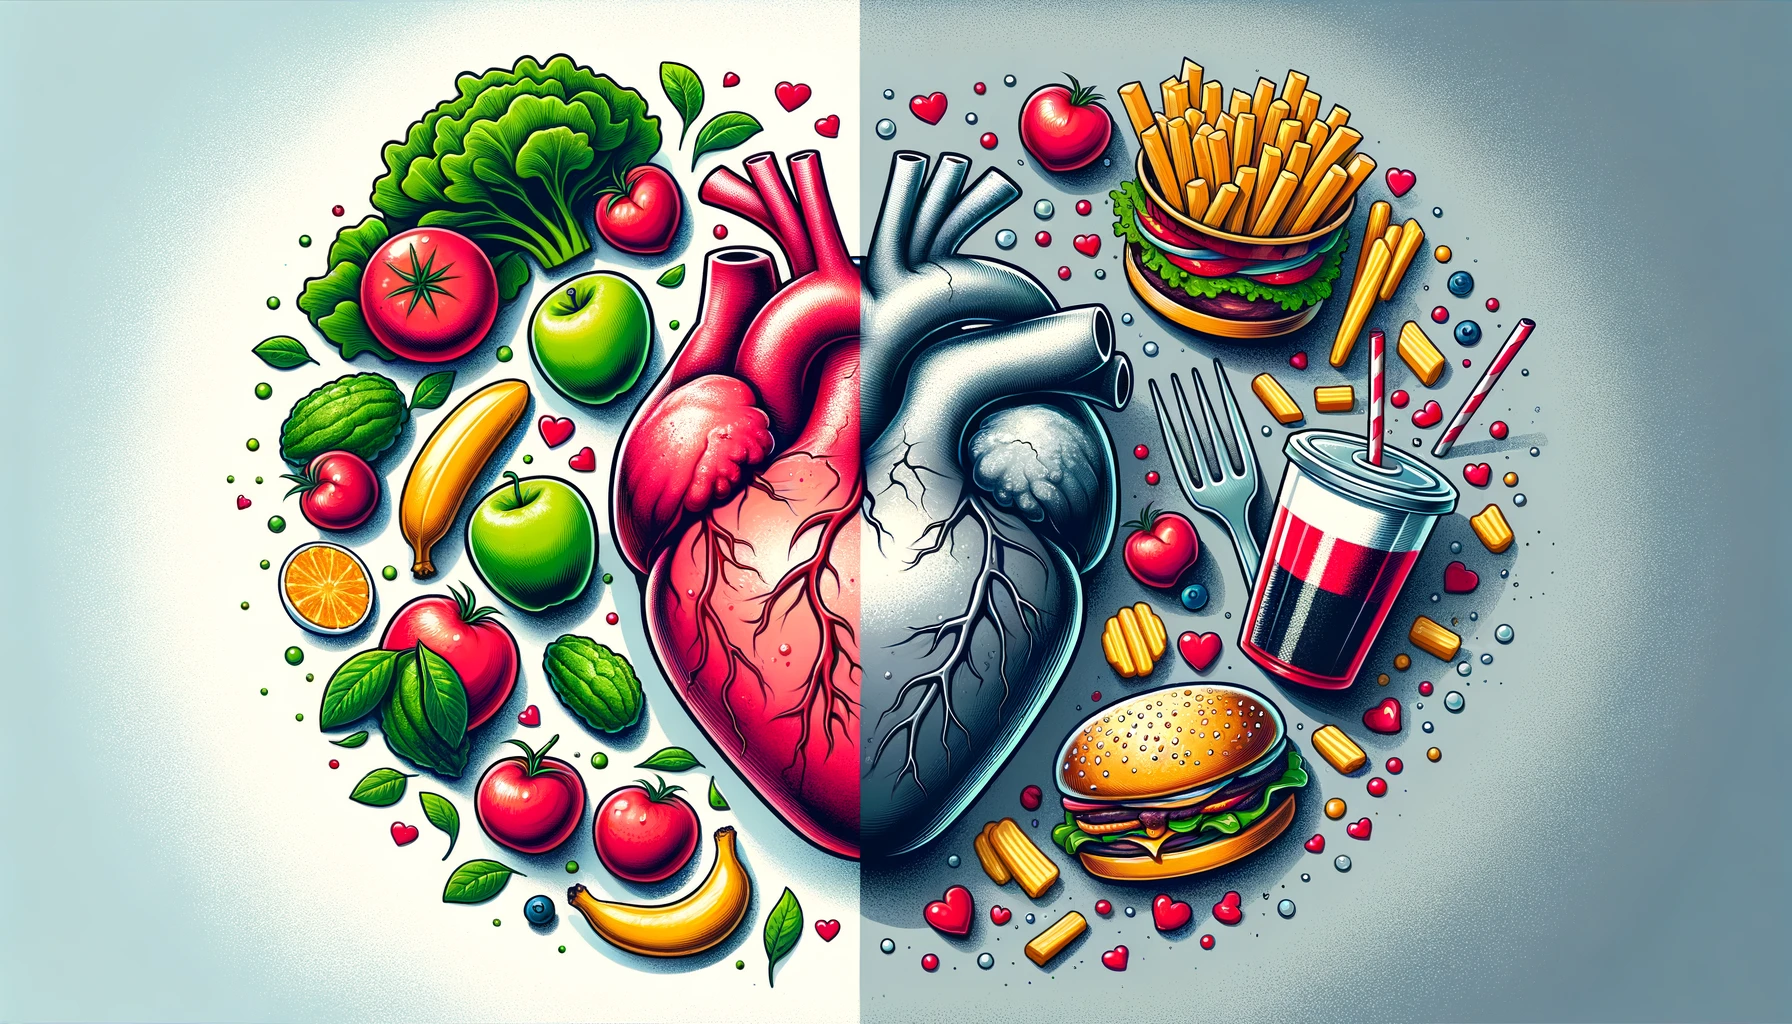 Illustration of a healthy heart with fresh foods on one side and a heart affected by fast food on the other.